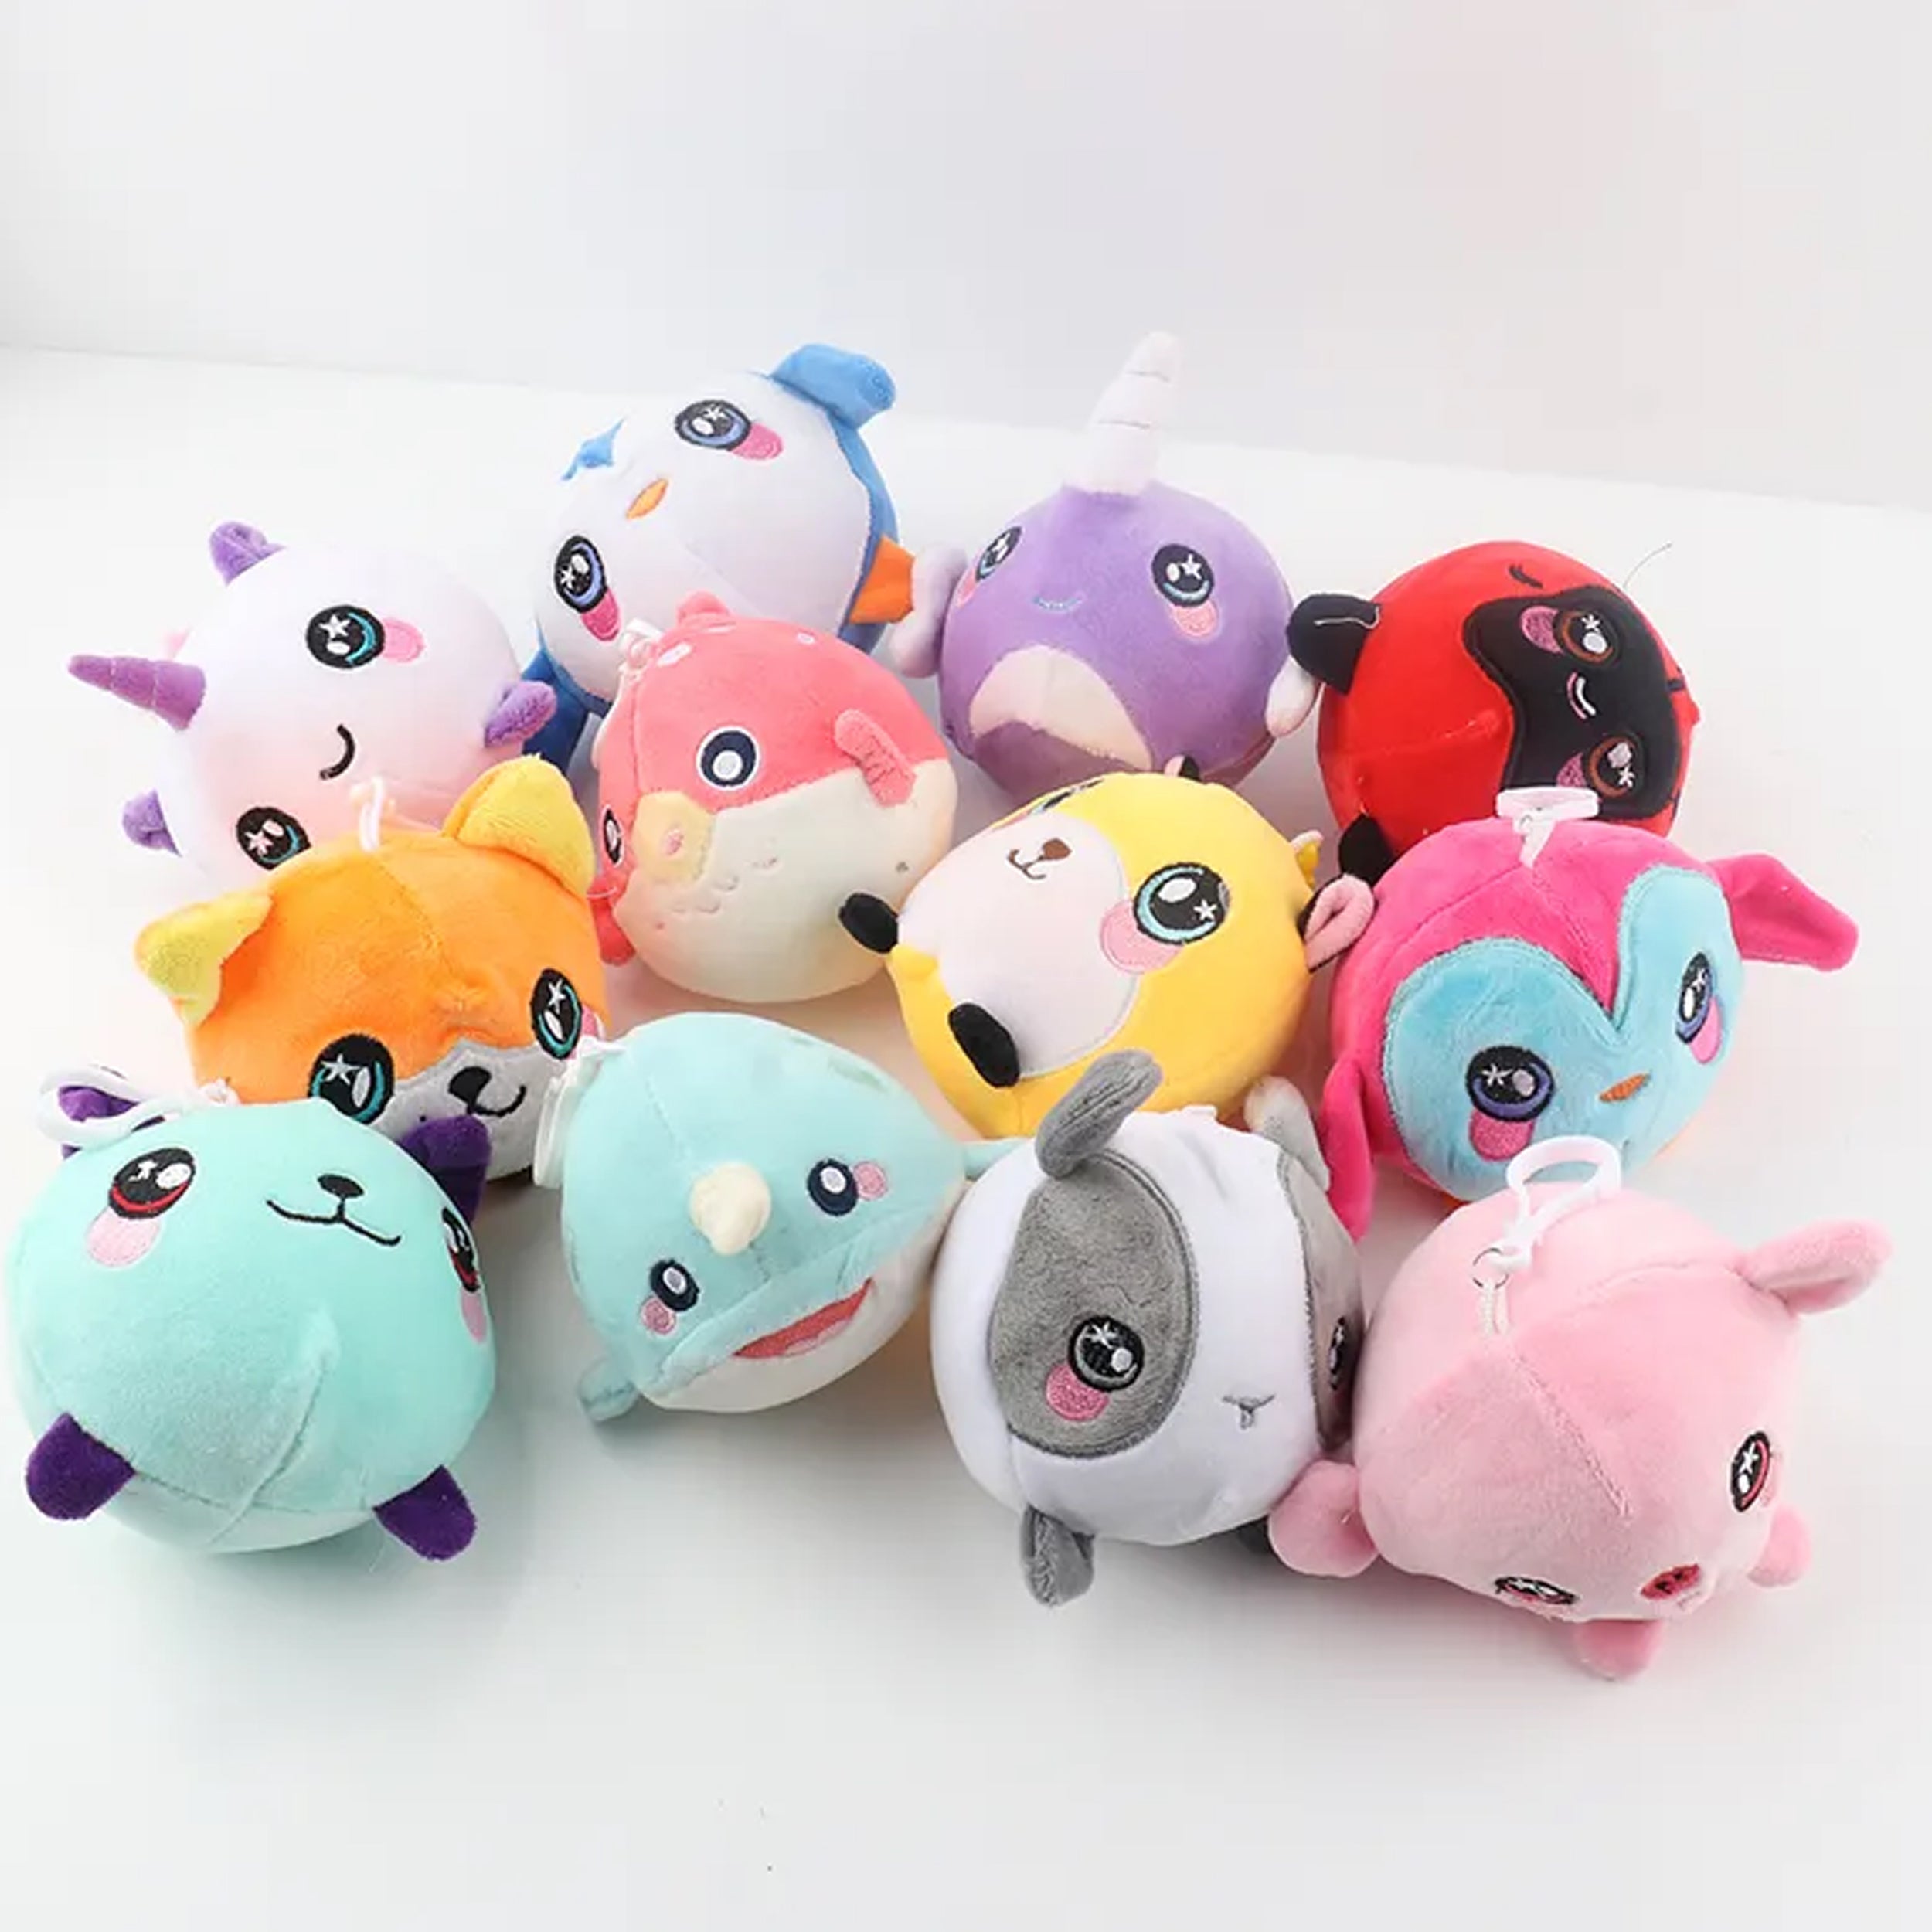 Discover Endless Fun with New Animal Family Plush Kids Toy- Assorted